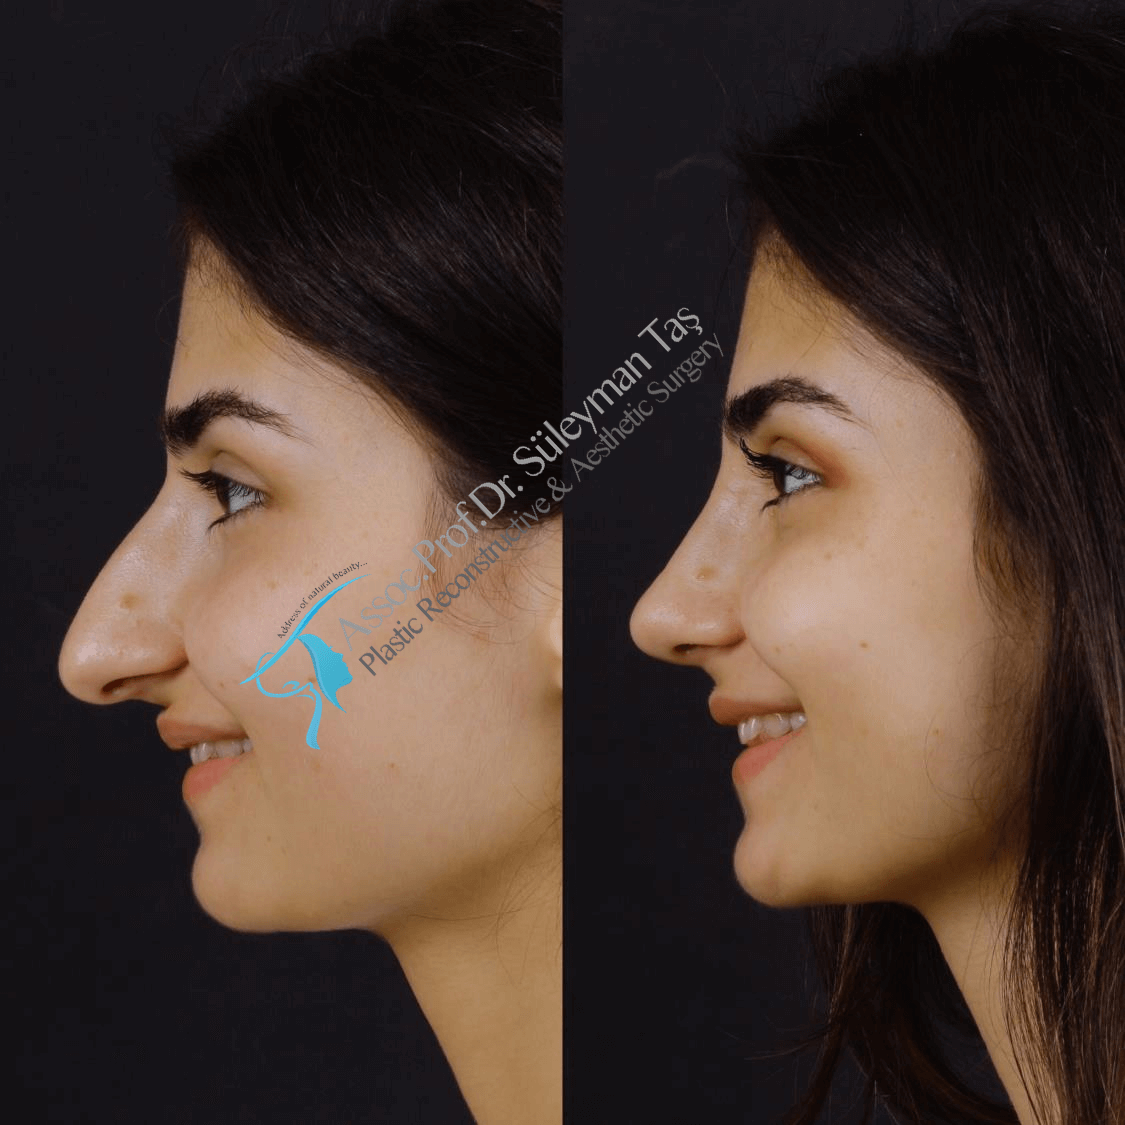 Before and after rhinoplasty female in istanbul